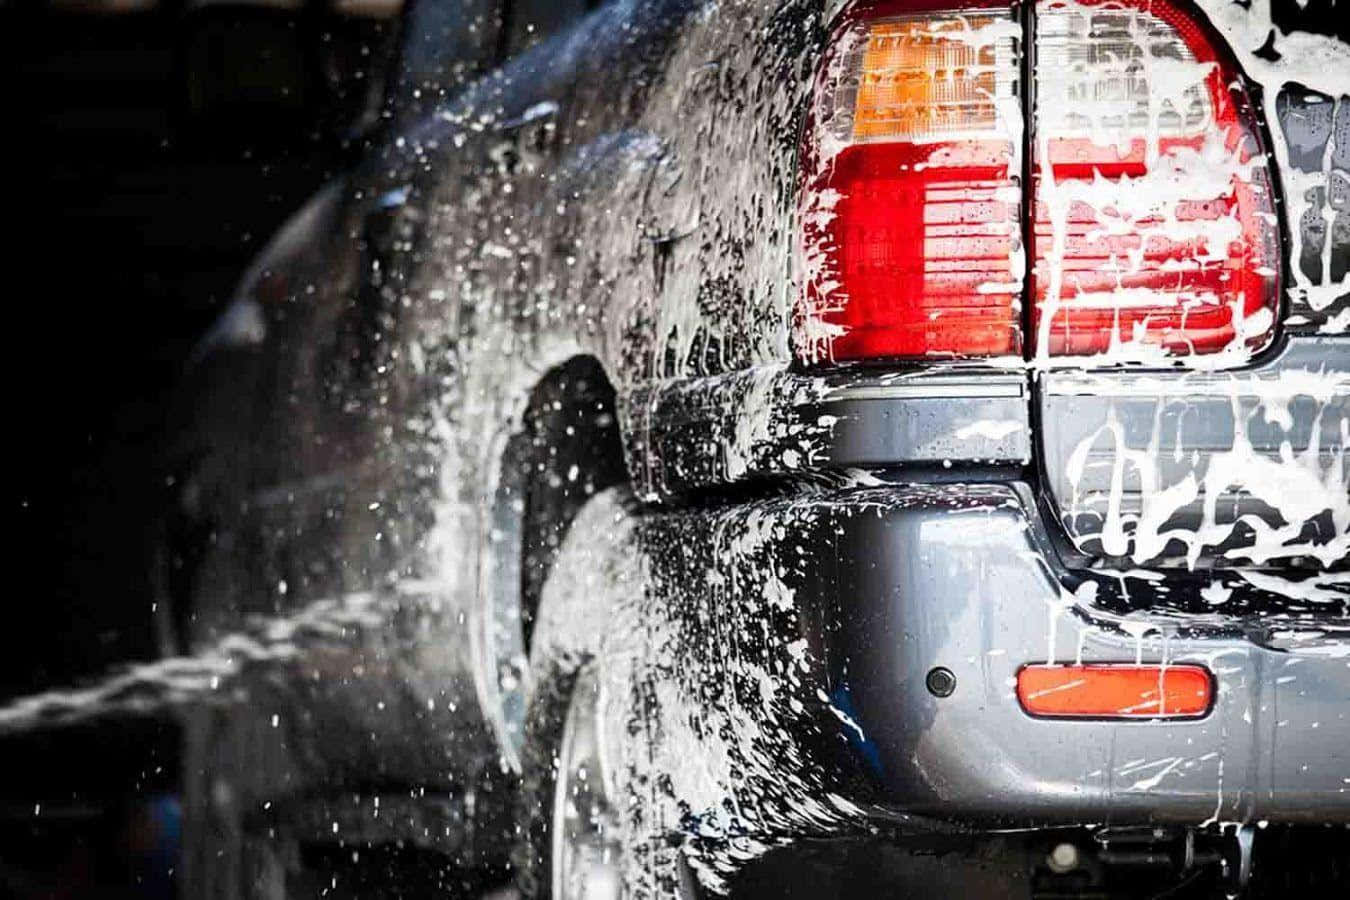 Refresh your ride with a professional car wash